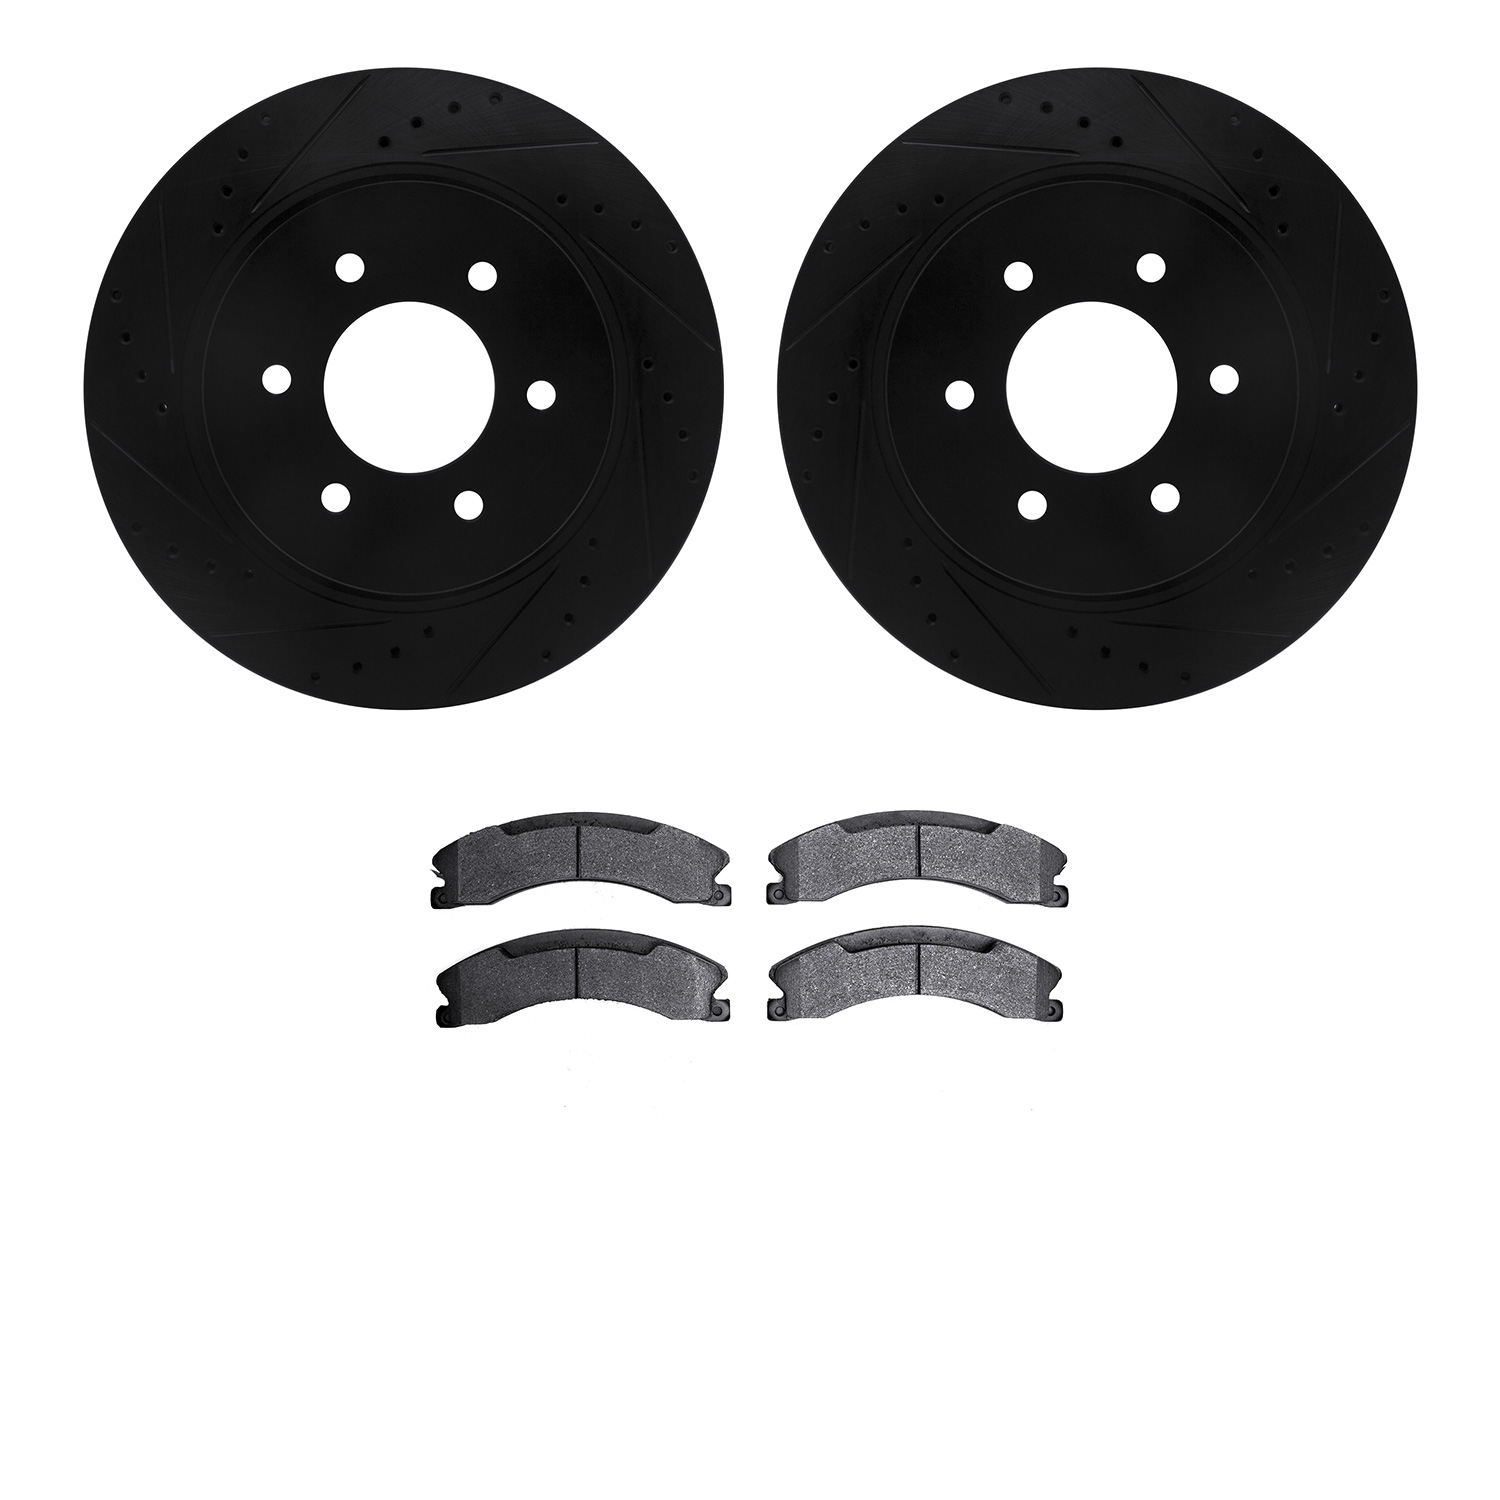 8402-67008 Drilled/Slotted Brake Rotors with Ultimate-Duty Brake Pads Kit [Black], Fits Select Infiniti/Nissan, Position: Front